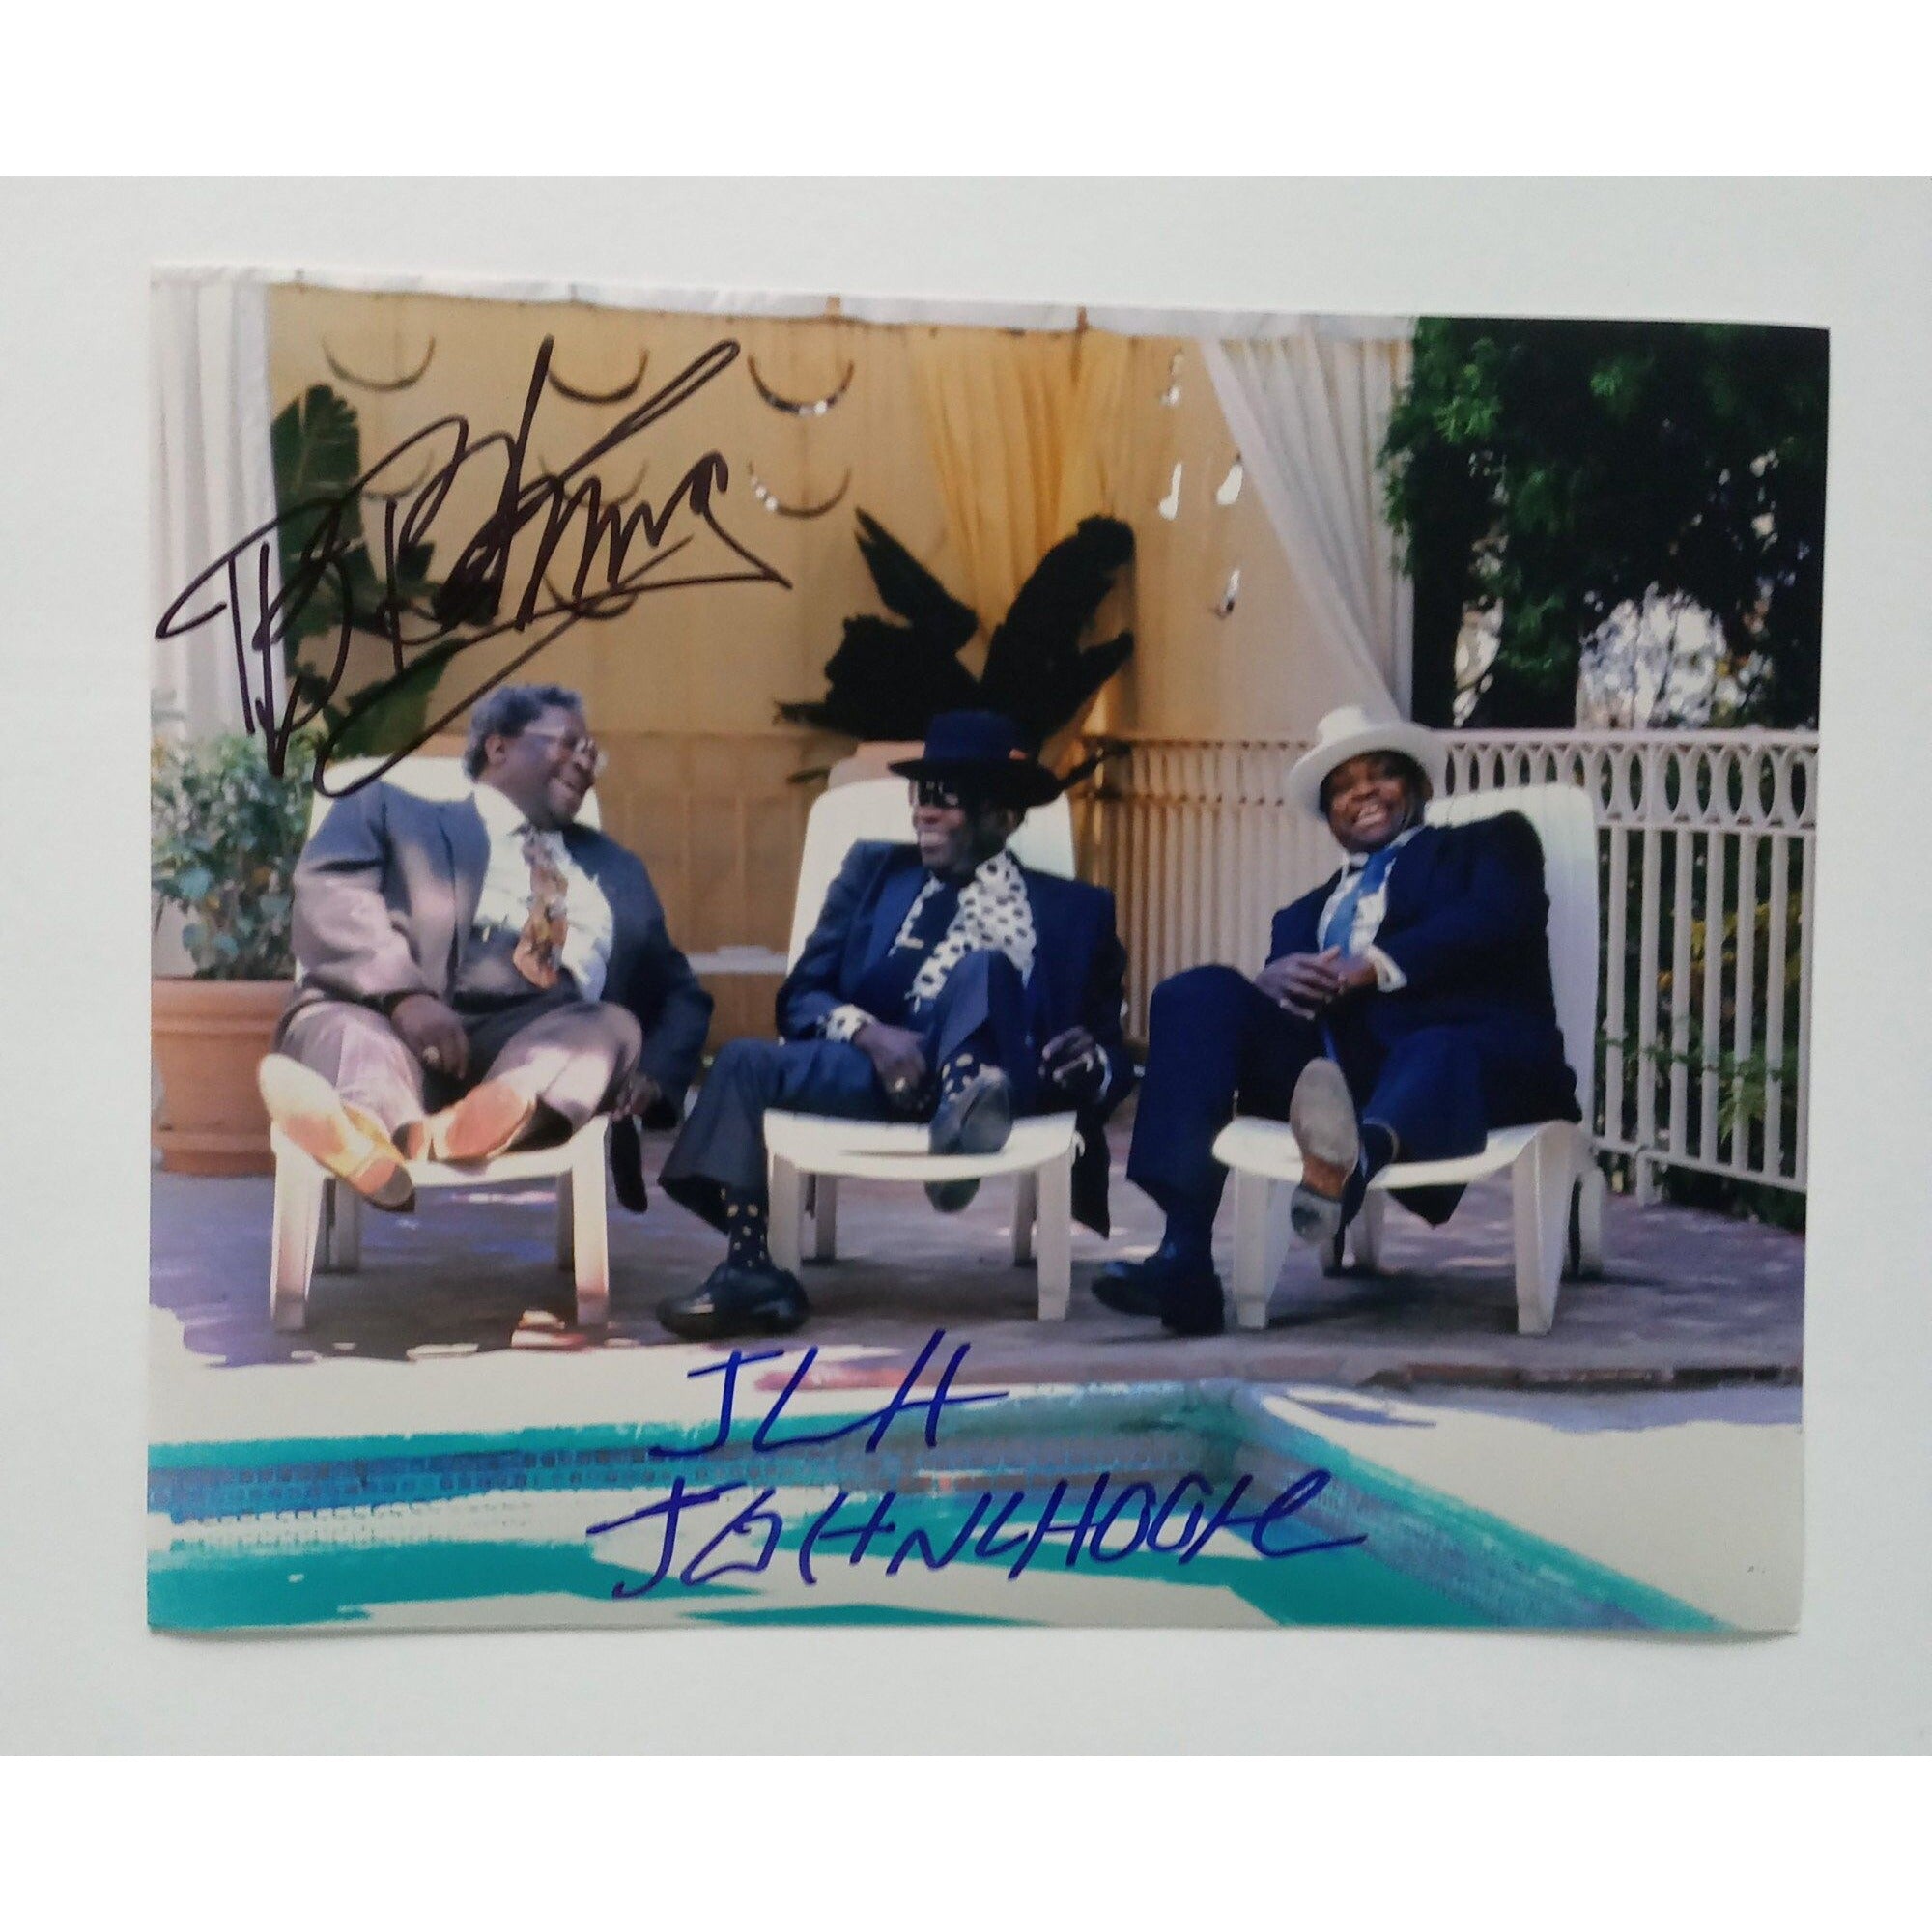 B.B. King and John Lee Hooker 8 x 10 signed photo with proof